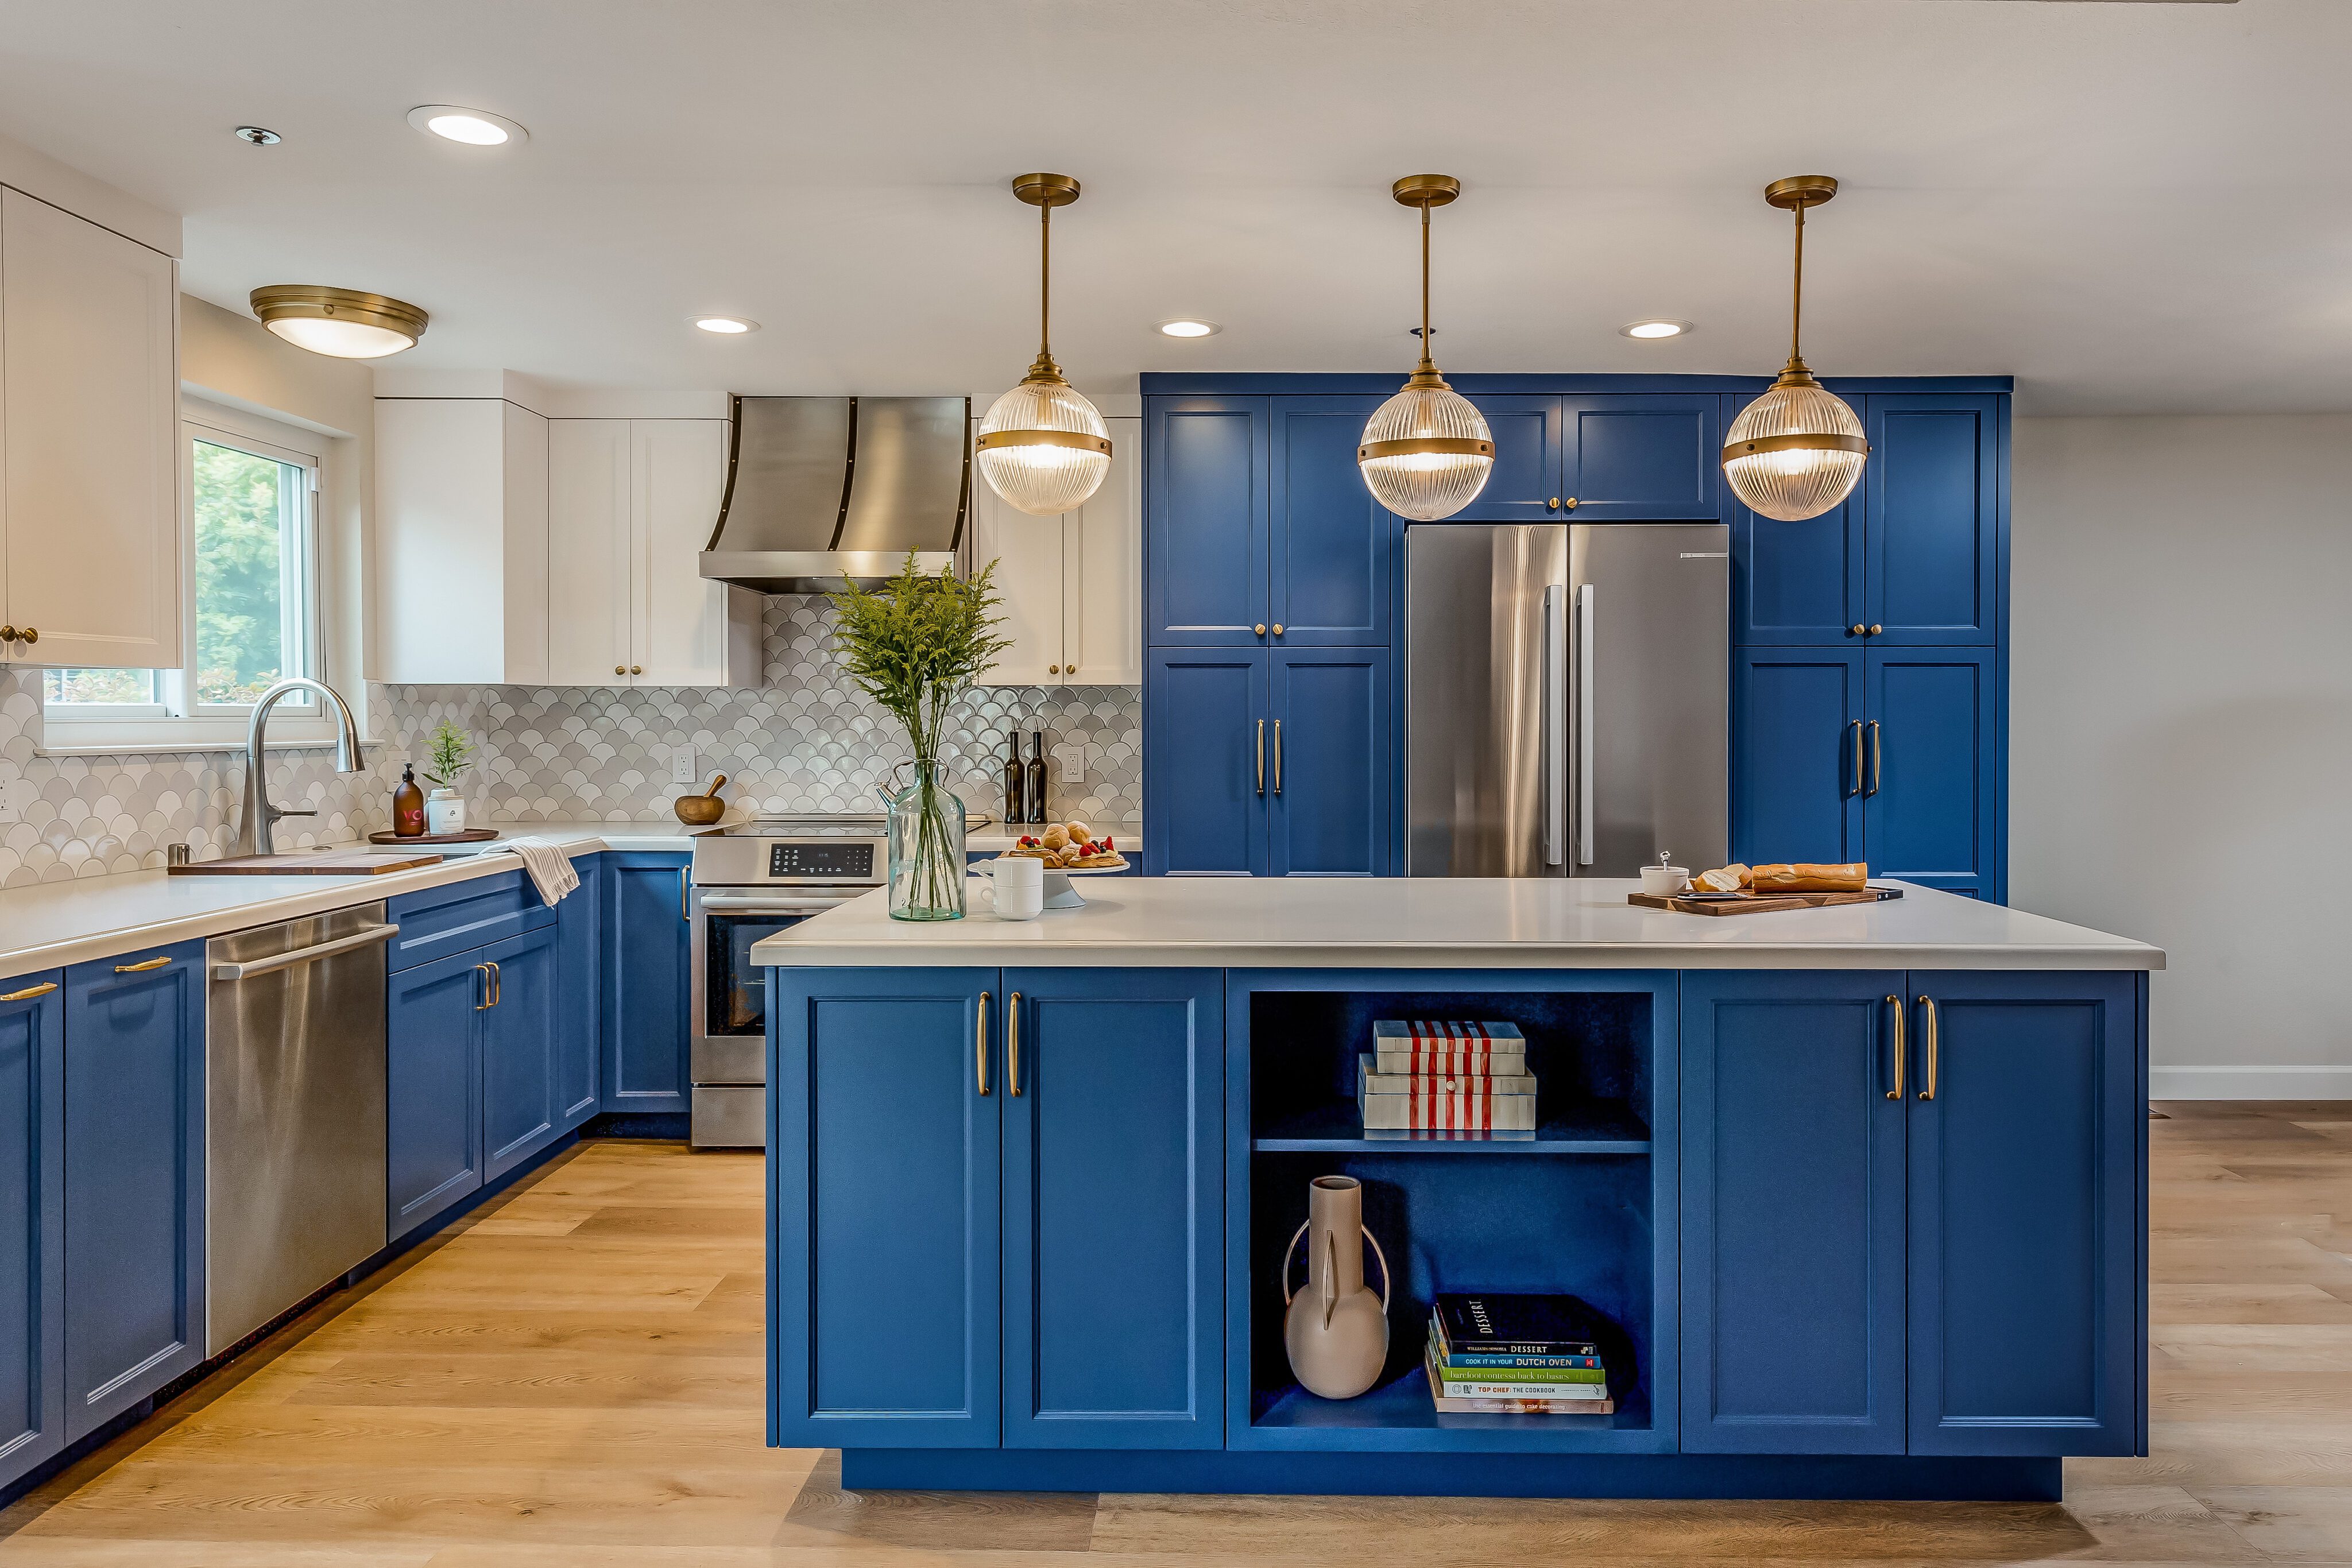 A-minor-kitchen-remodel-will-add-value-to-your-home